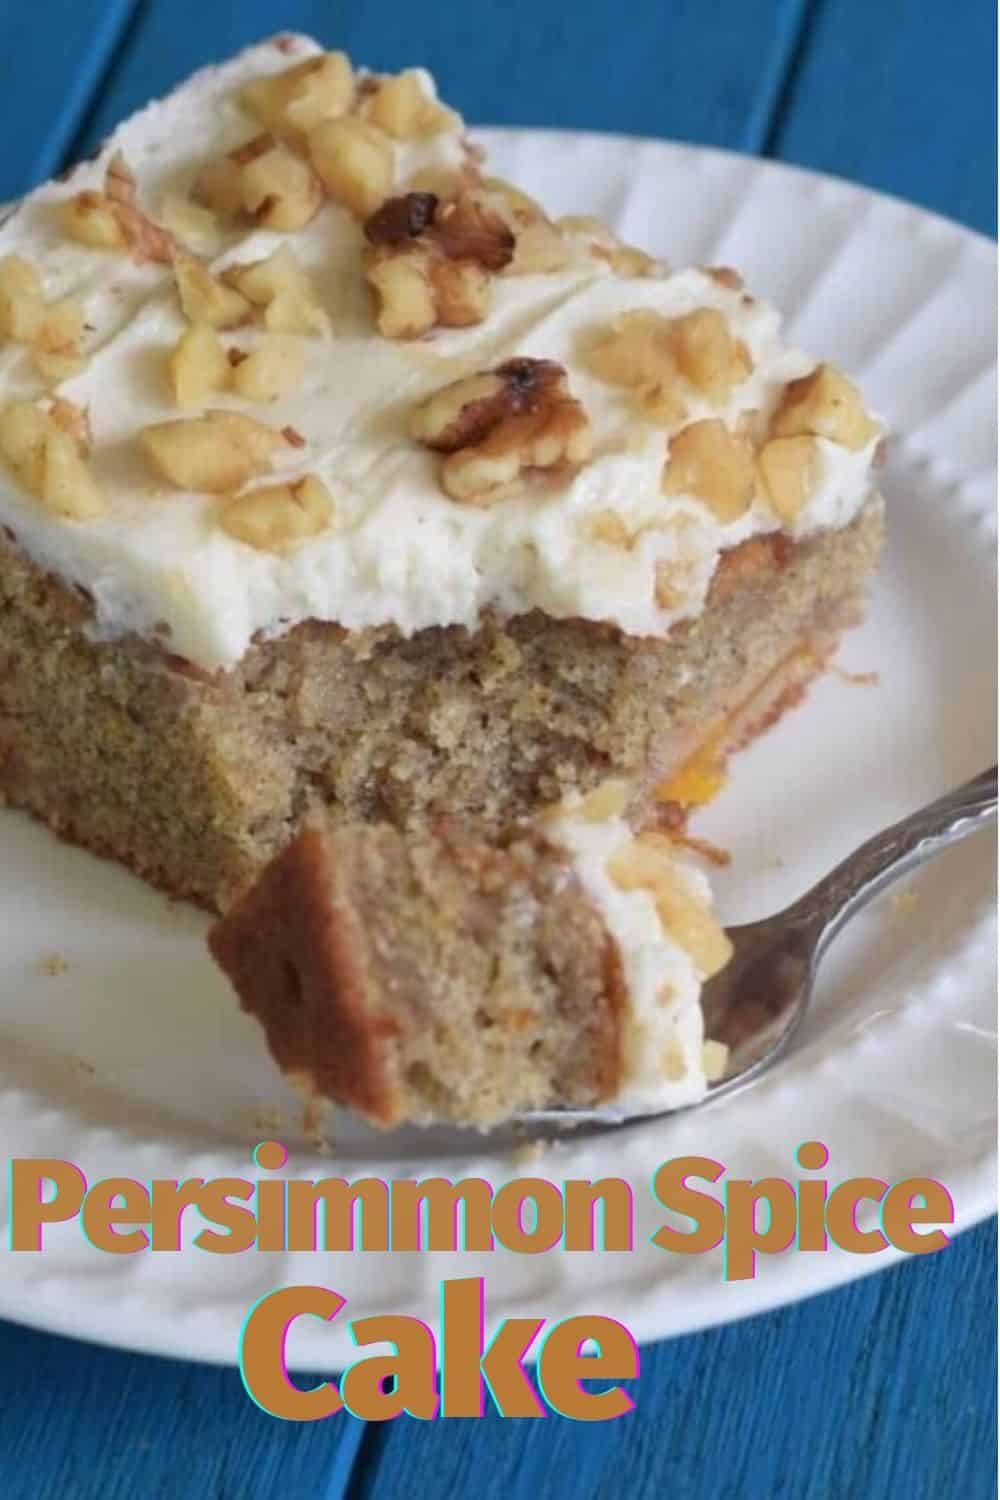 Spice sheet cake piece with walnuts on icing. Fork on plate with cake on it with text overlay.